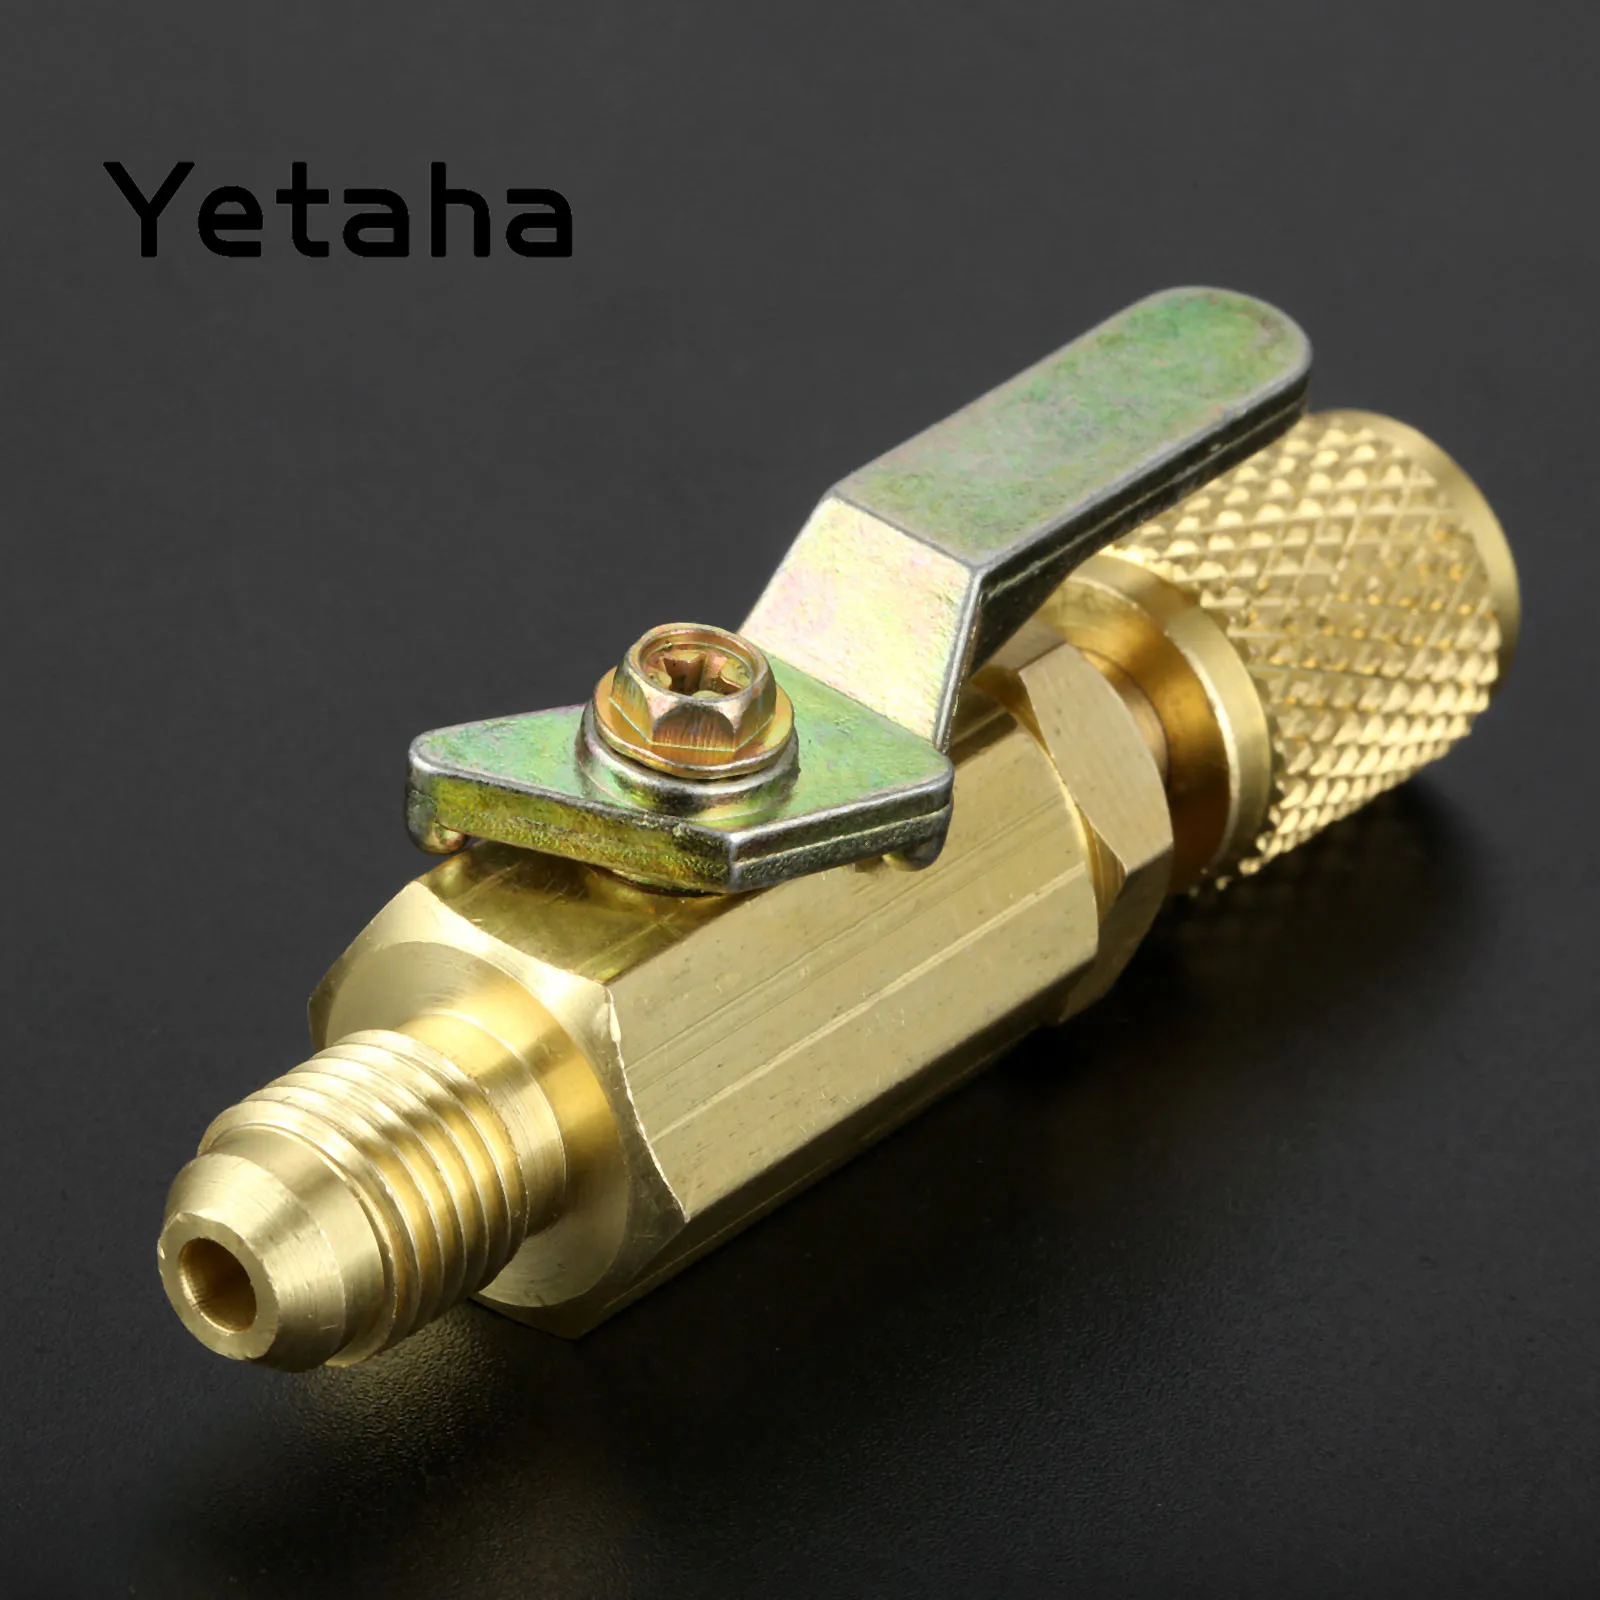 

Yetaha 1Pc R410a R134a Air Conditioning Refrigerant Valve Copper Straight Ball Valves Adapter A/C Charging Hoses Tools